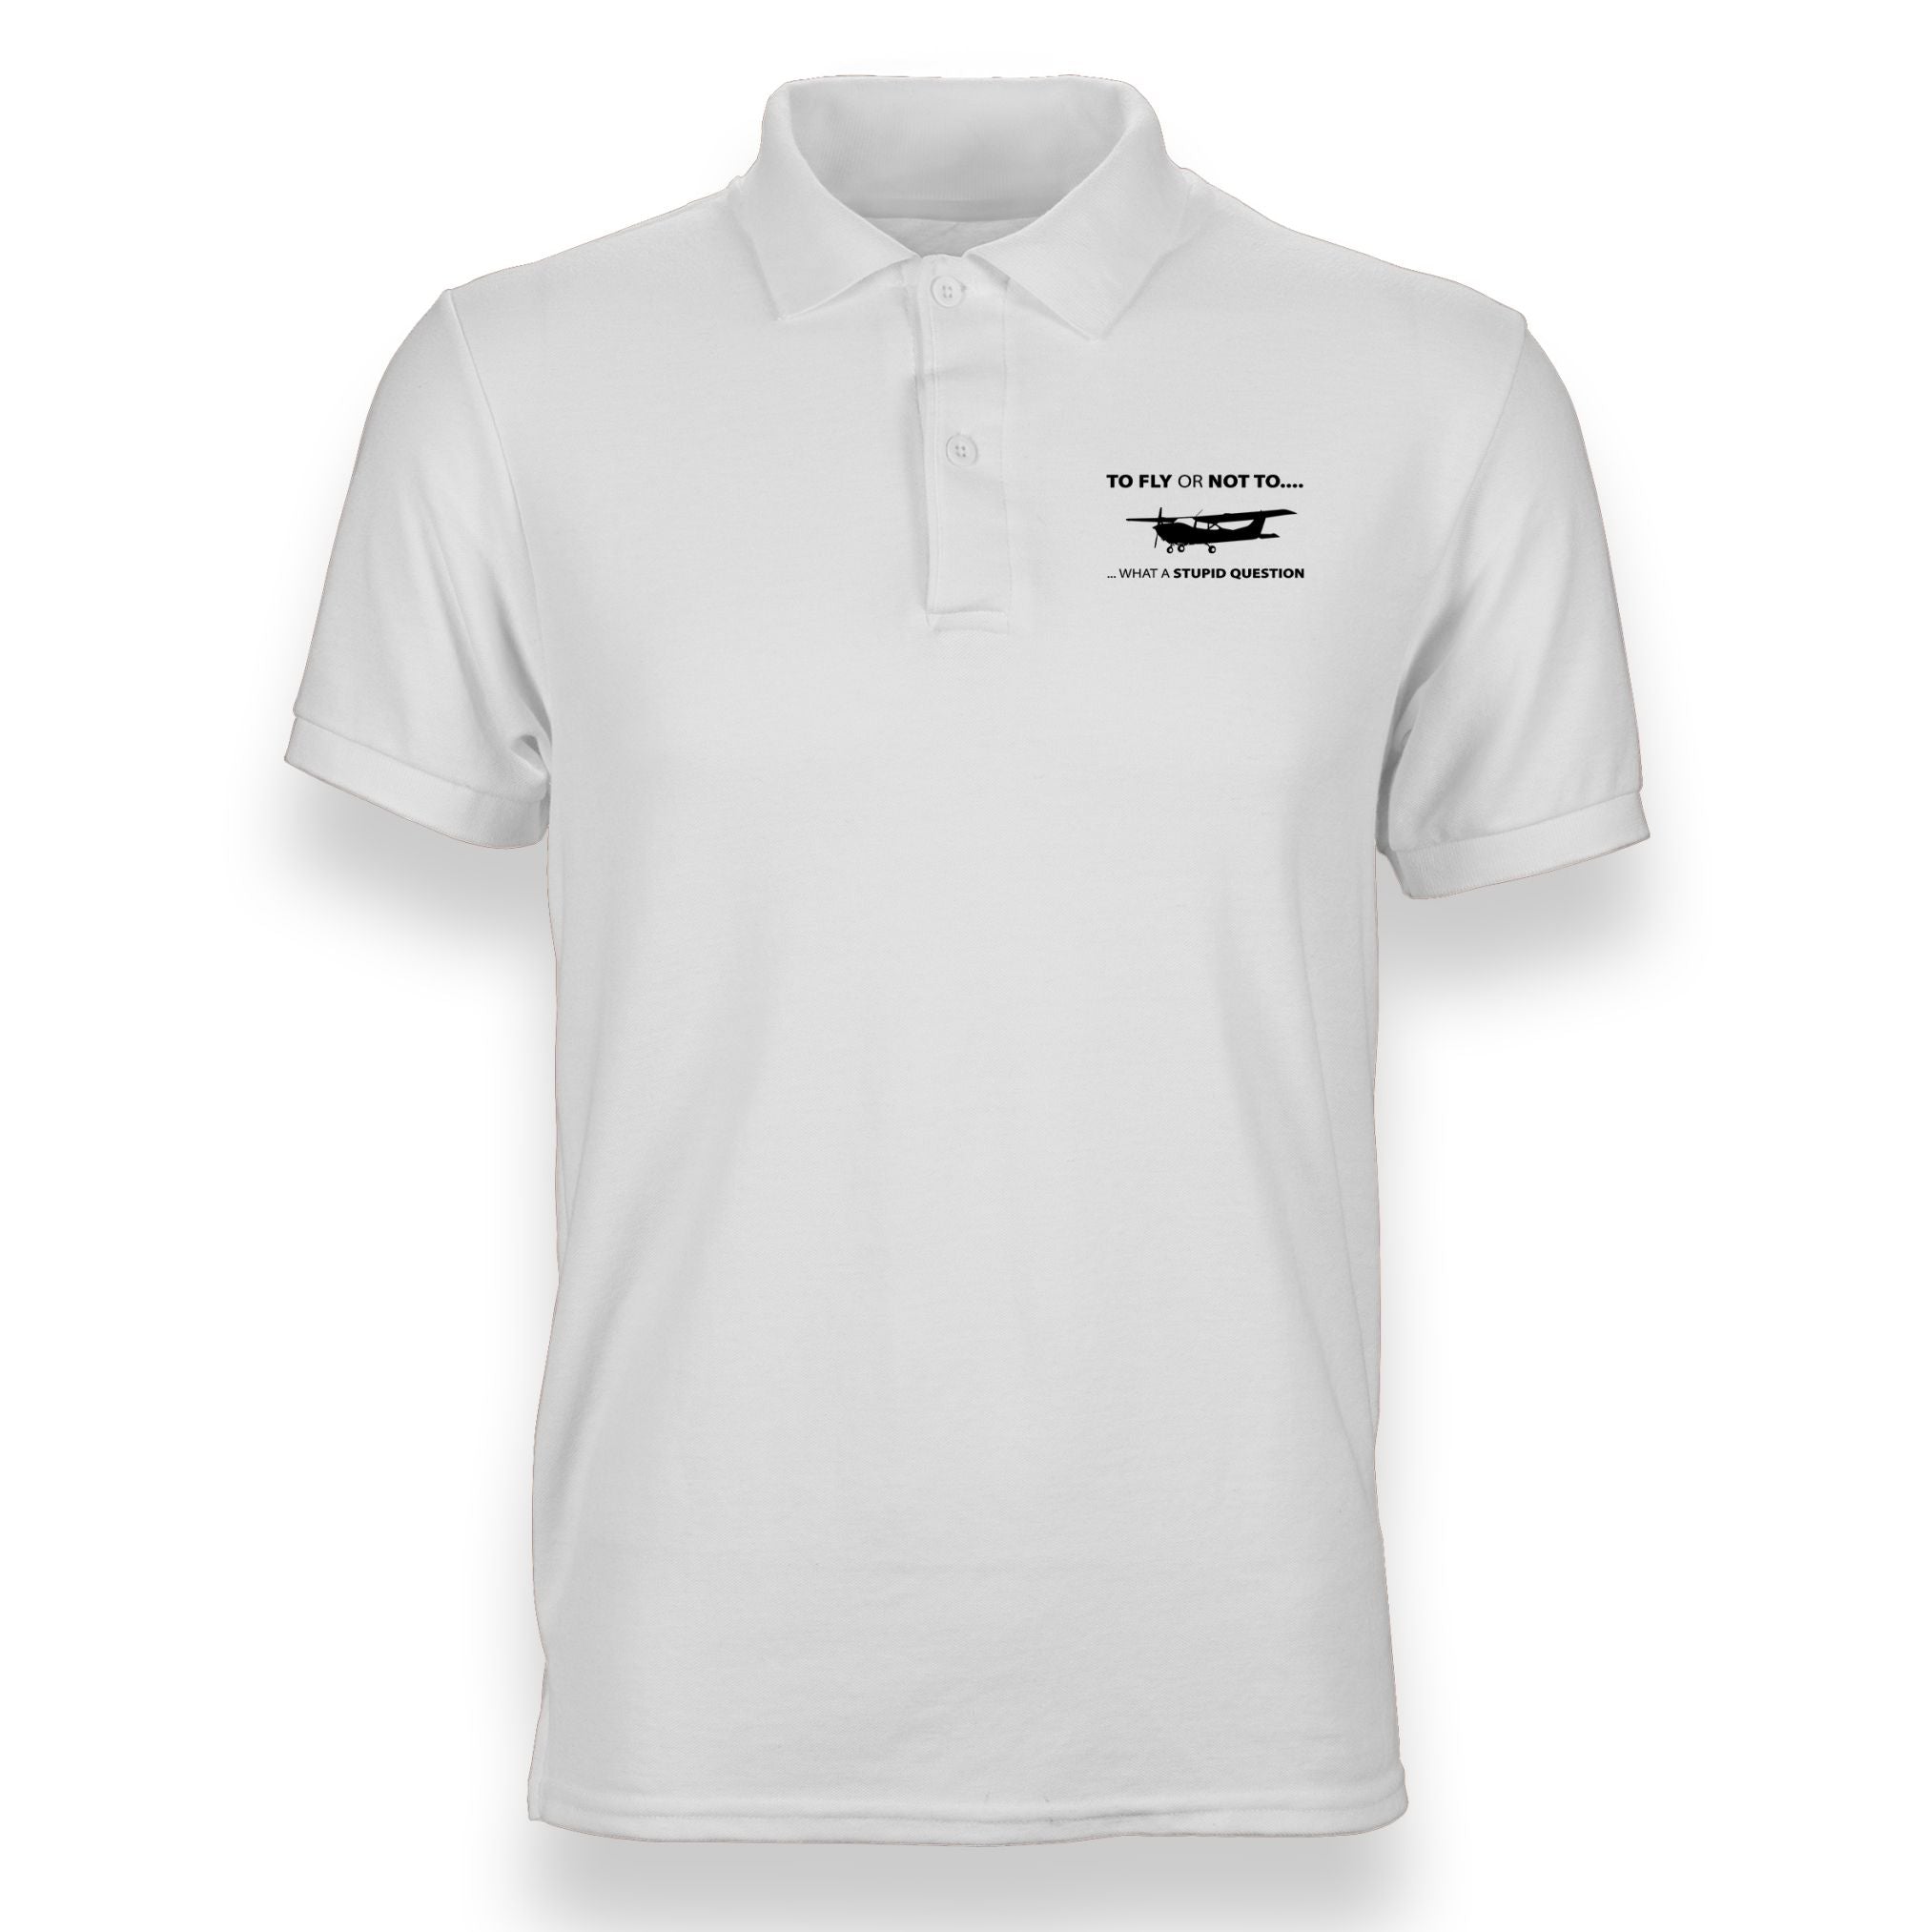 To Fly or Not To What a Stupid Question Designed "WOMEN" Polo T-Shirts